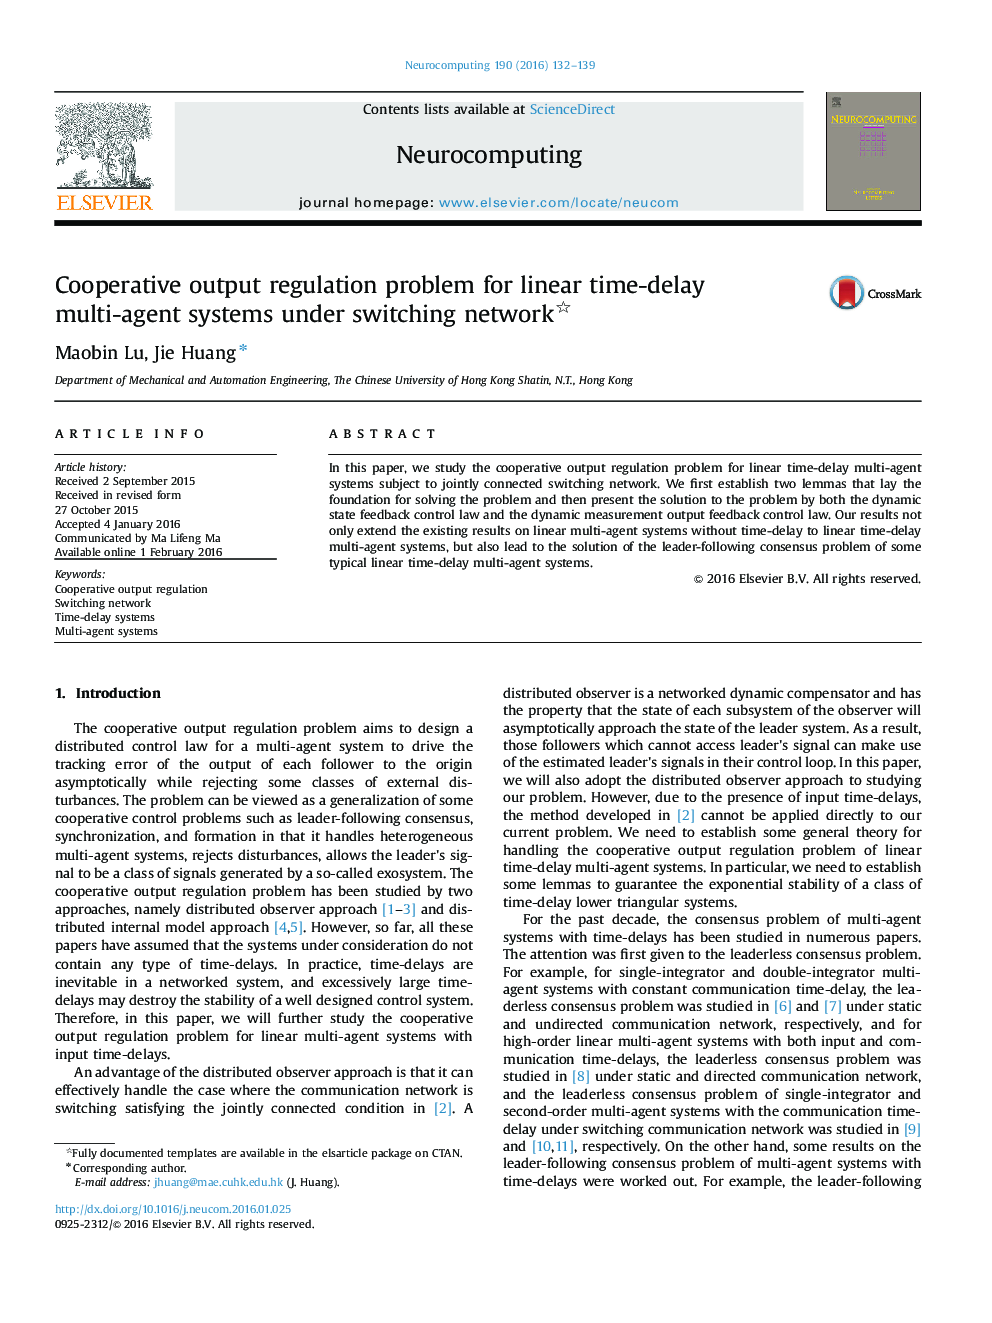 Cooperative output regulation problem for linear time-delay multi-agent systems under switching network 